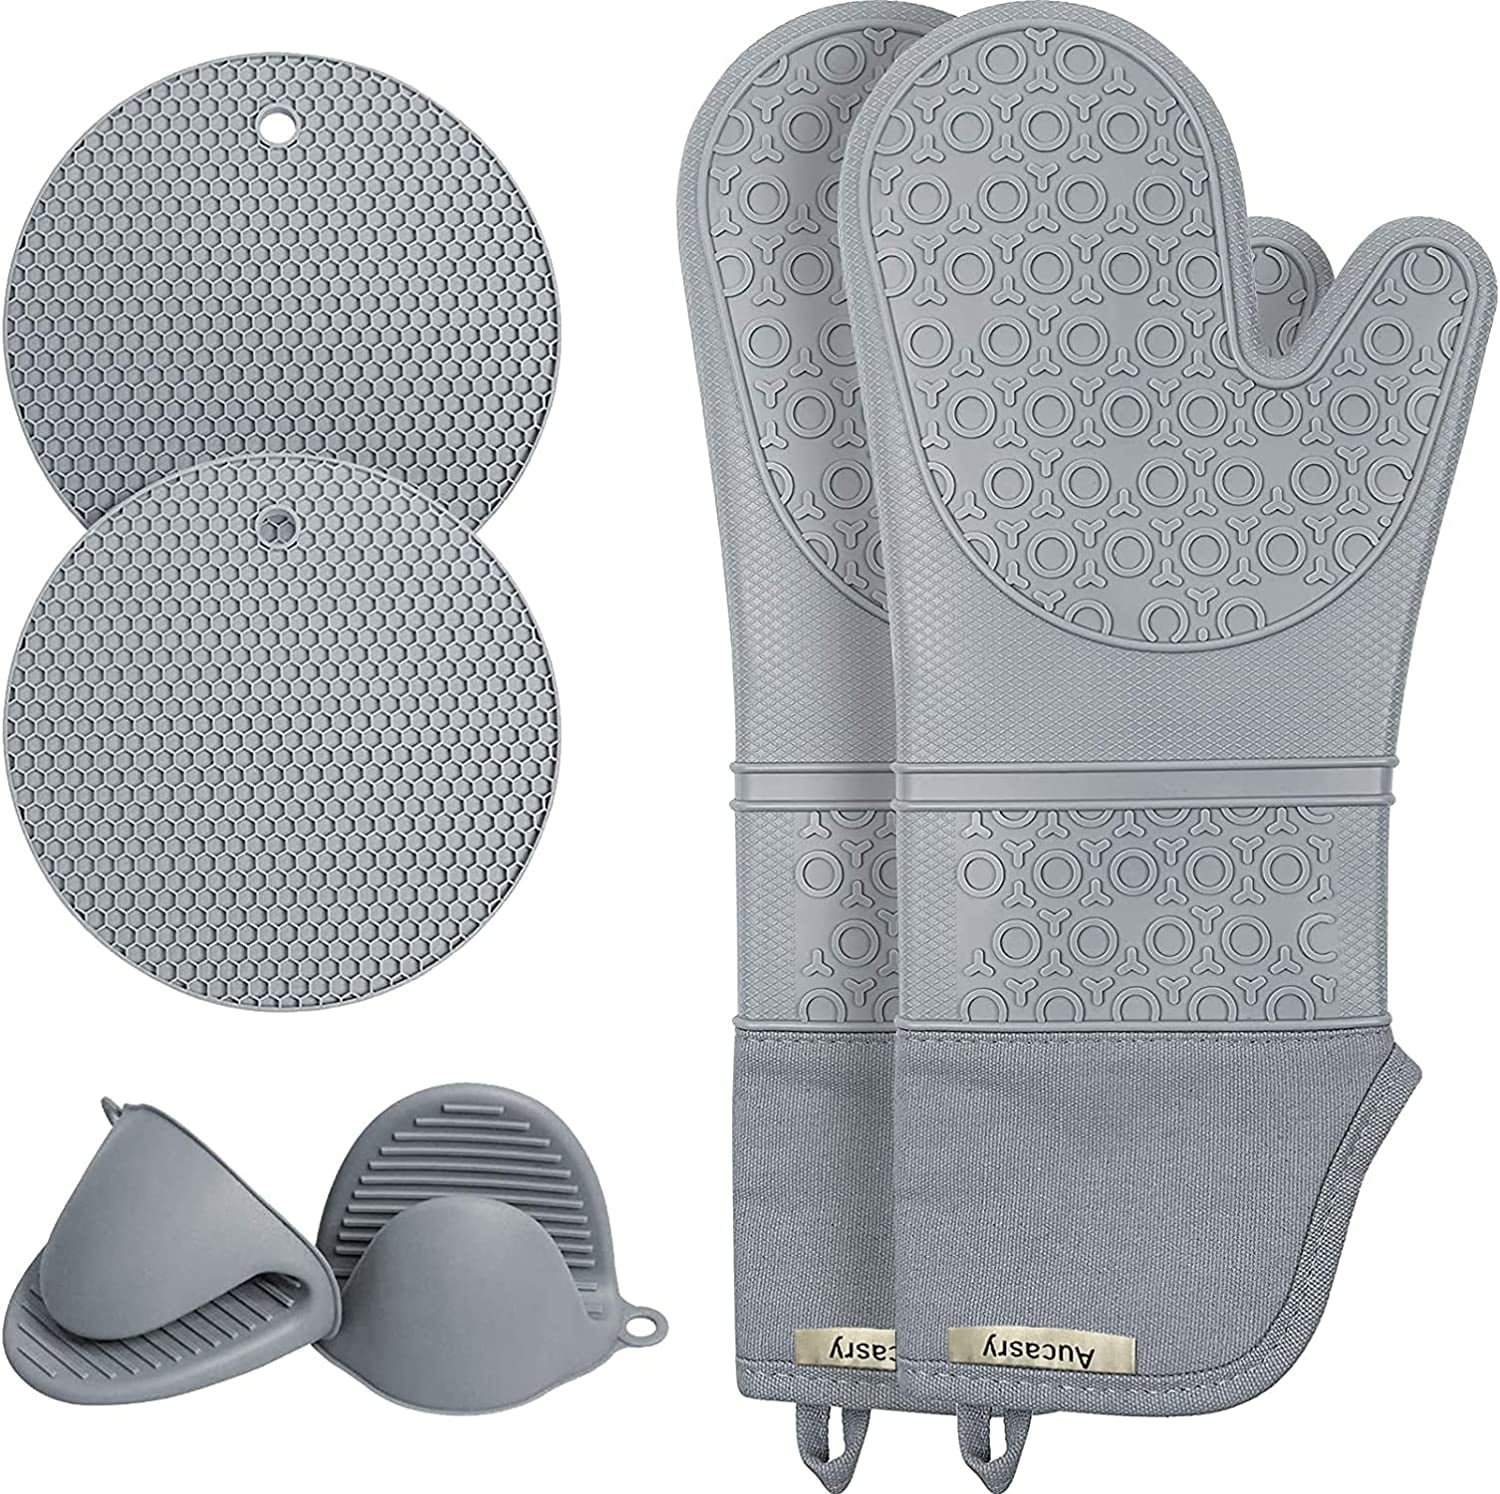 CUSINART SILICONE OVEN MITT LINED GLOVE HEAT RESISTANT POT HOLDER FOR COOKING 